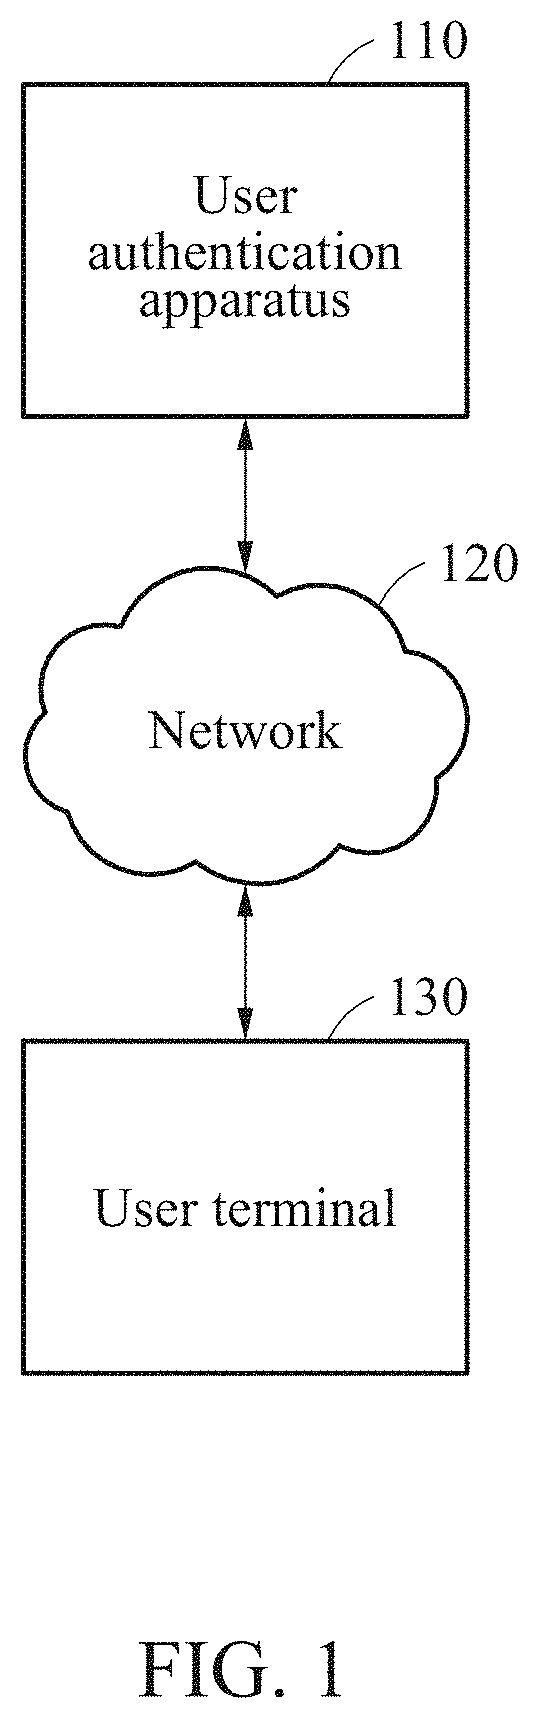 Method and apparatus for authenticating user